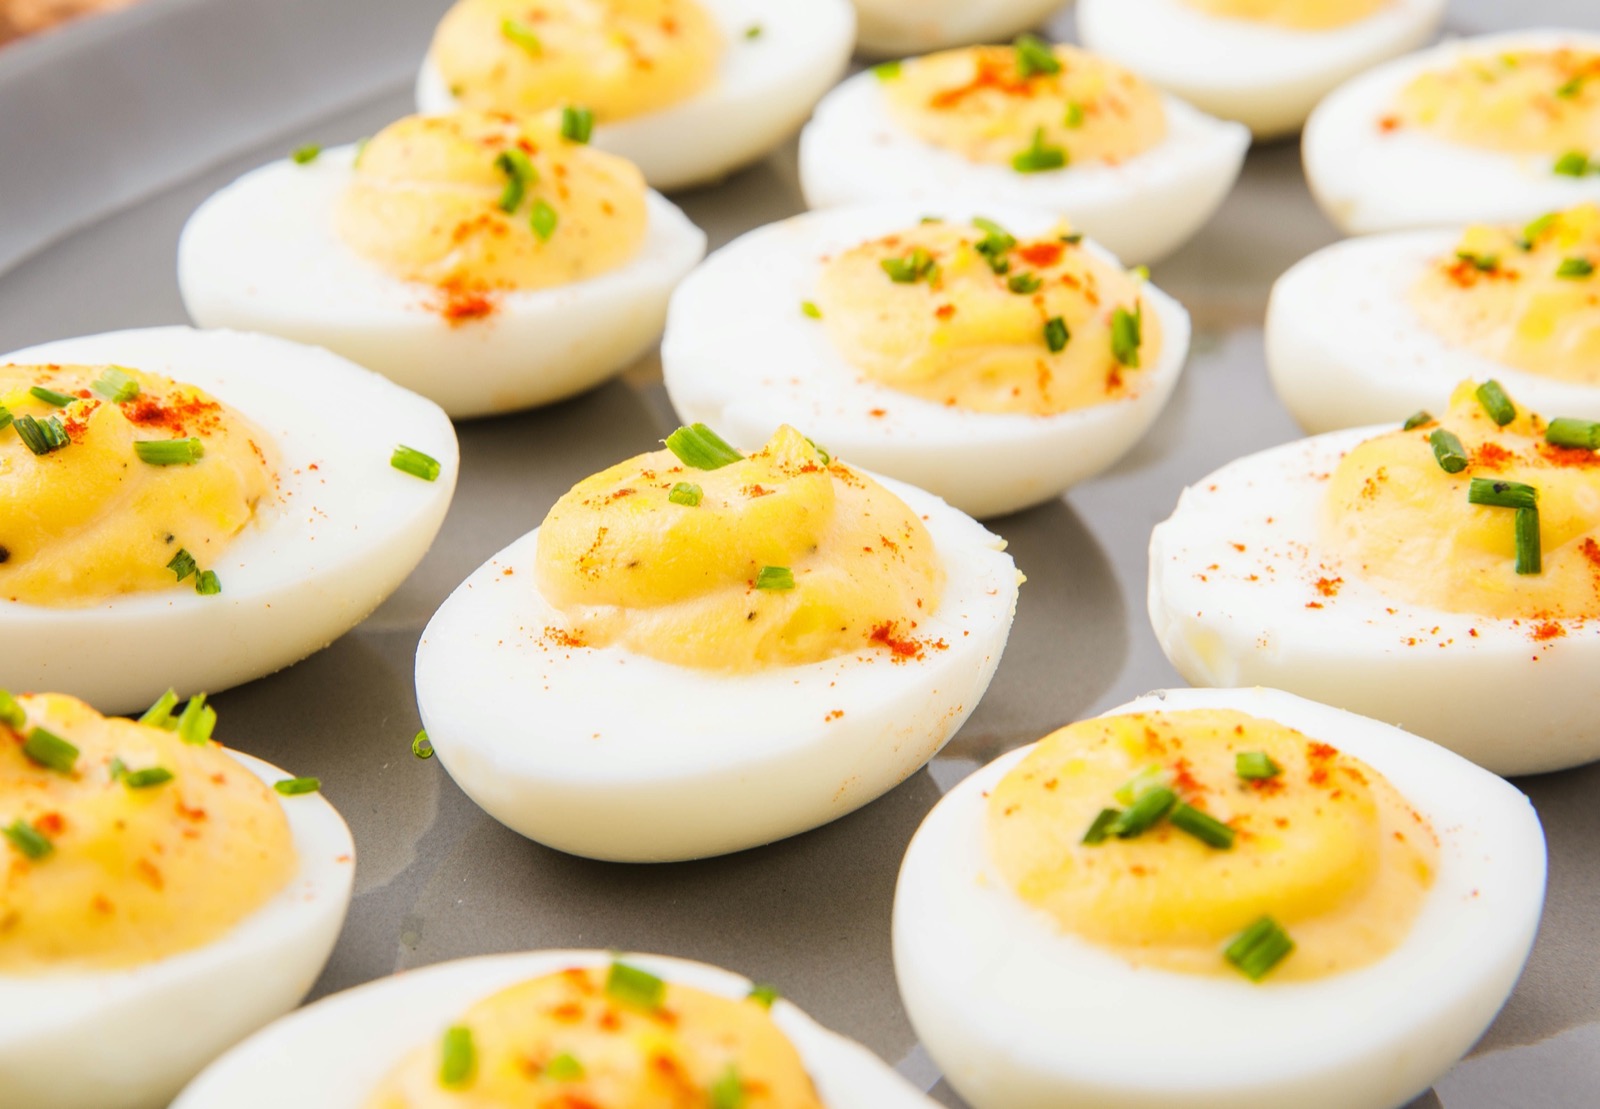 Can We Guess Your Age and Gender Based on the 🍳 Eggs You Like? Deviled Eggs